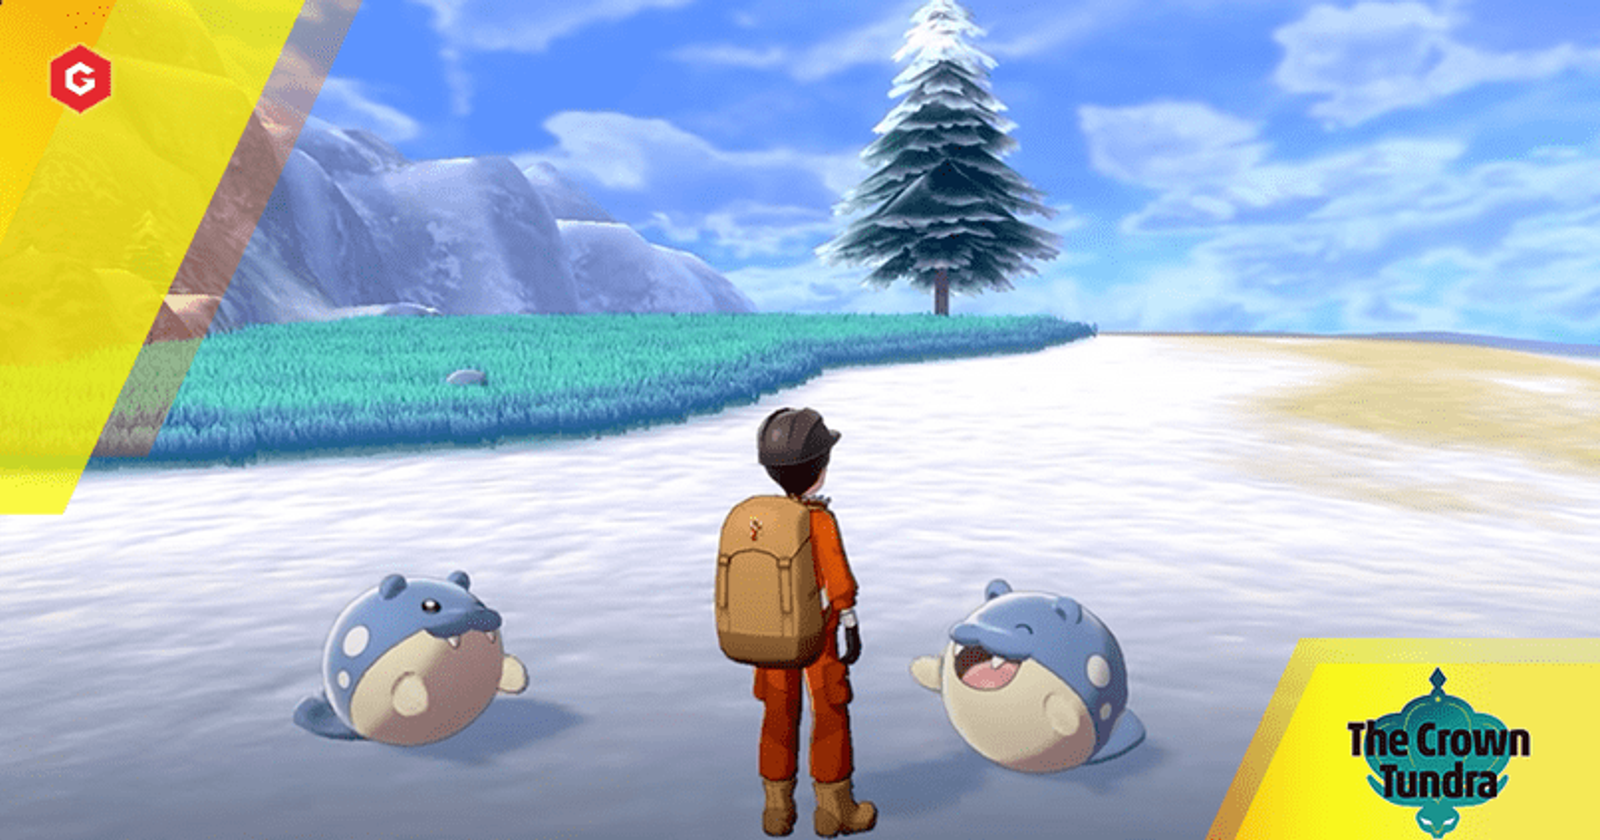 Pokemon Sword and Shield: Increase your chances of finding shiny